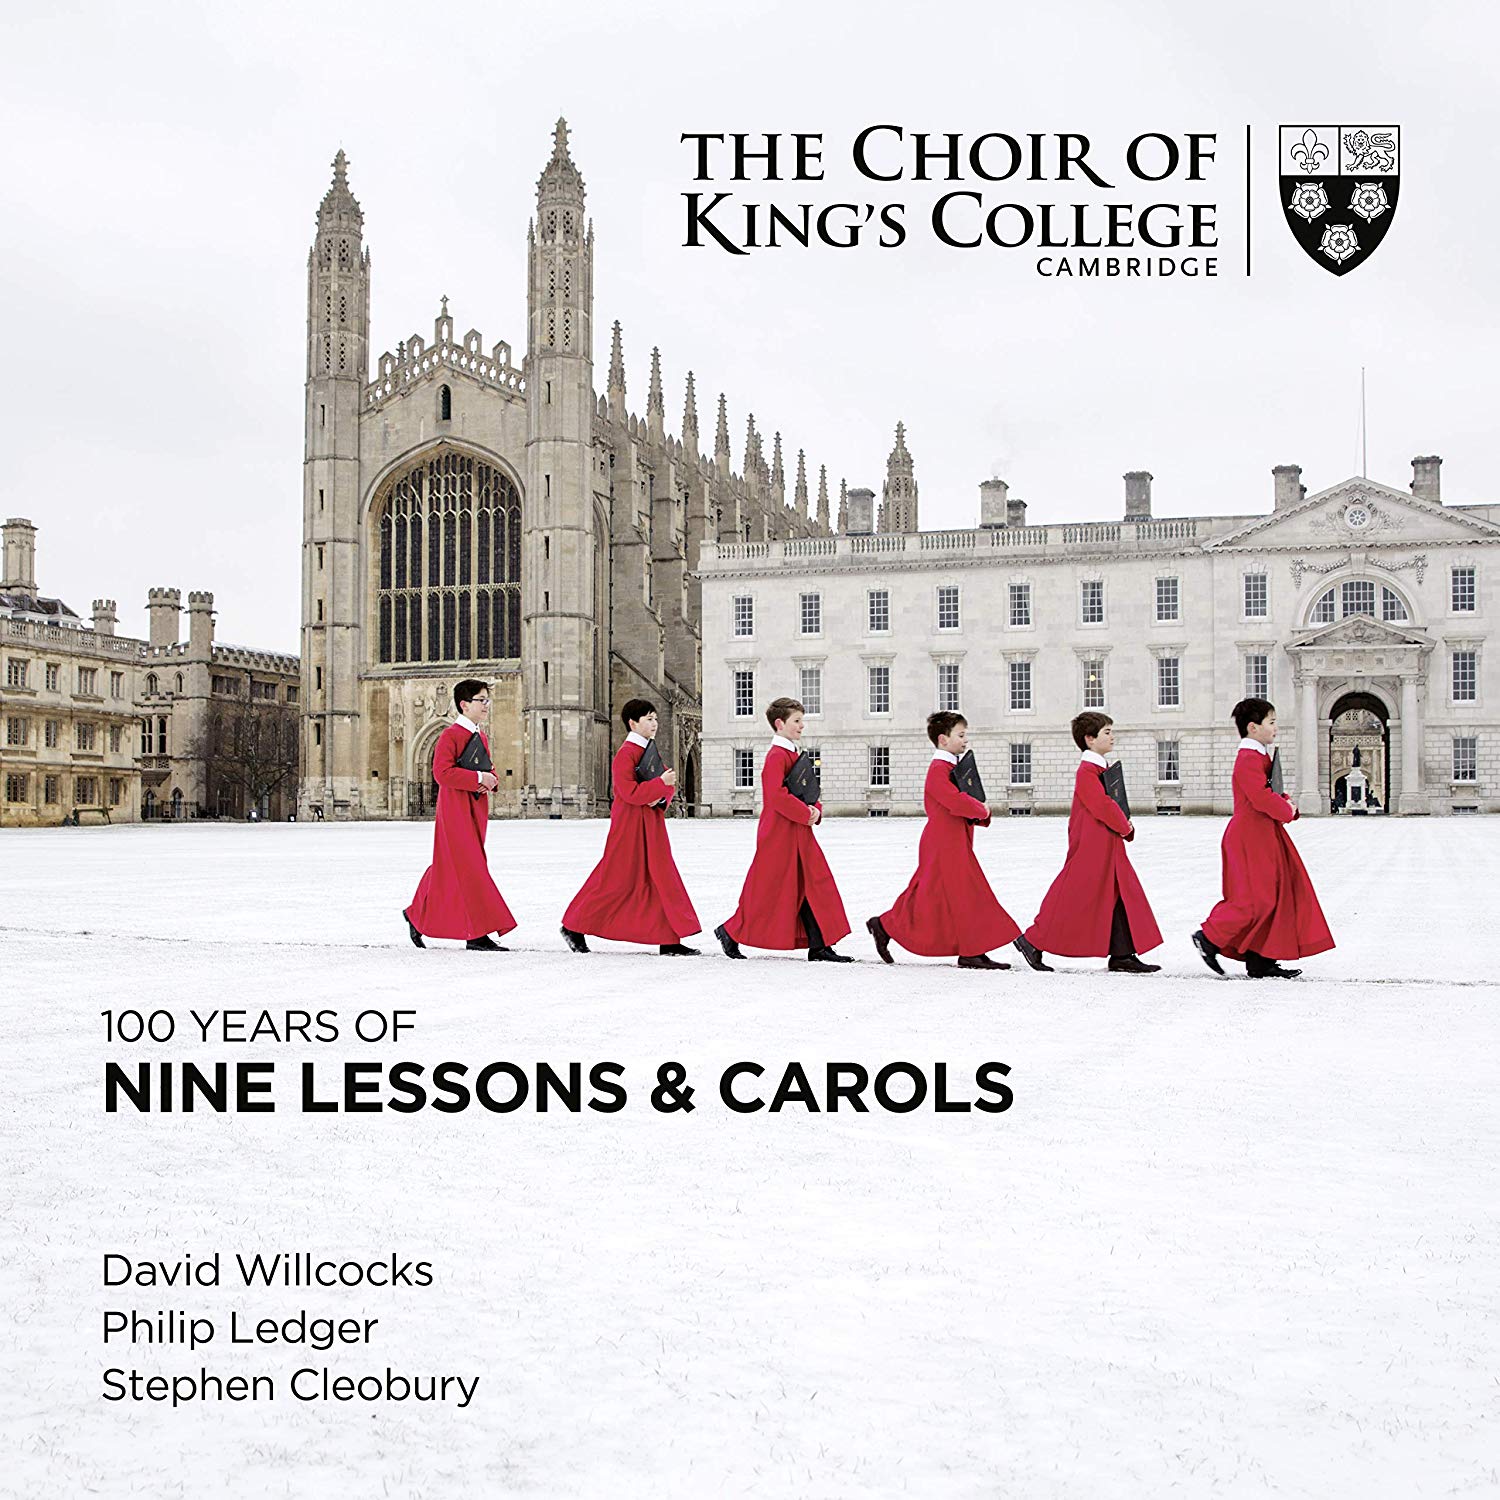 100 years of 9 lessons and carols